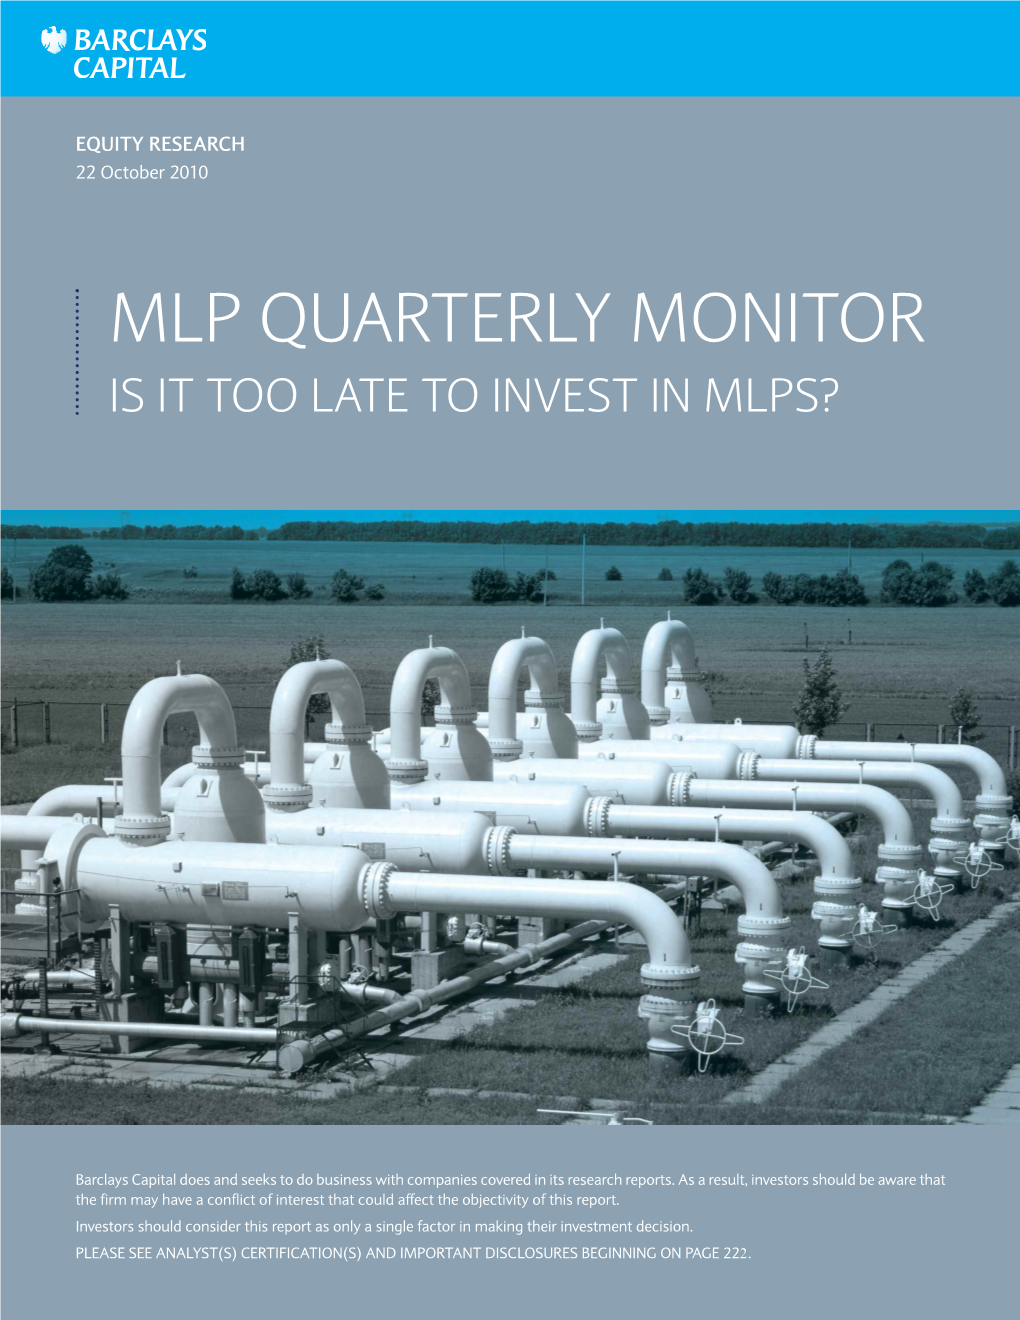 Mlp Quarterly Monitor Is It Too Late to Invest in Mlps?